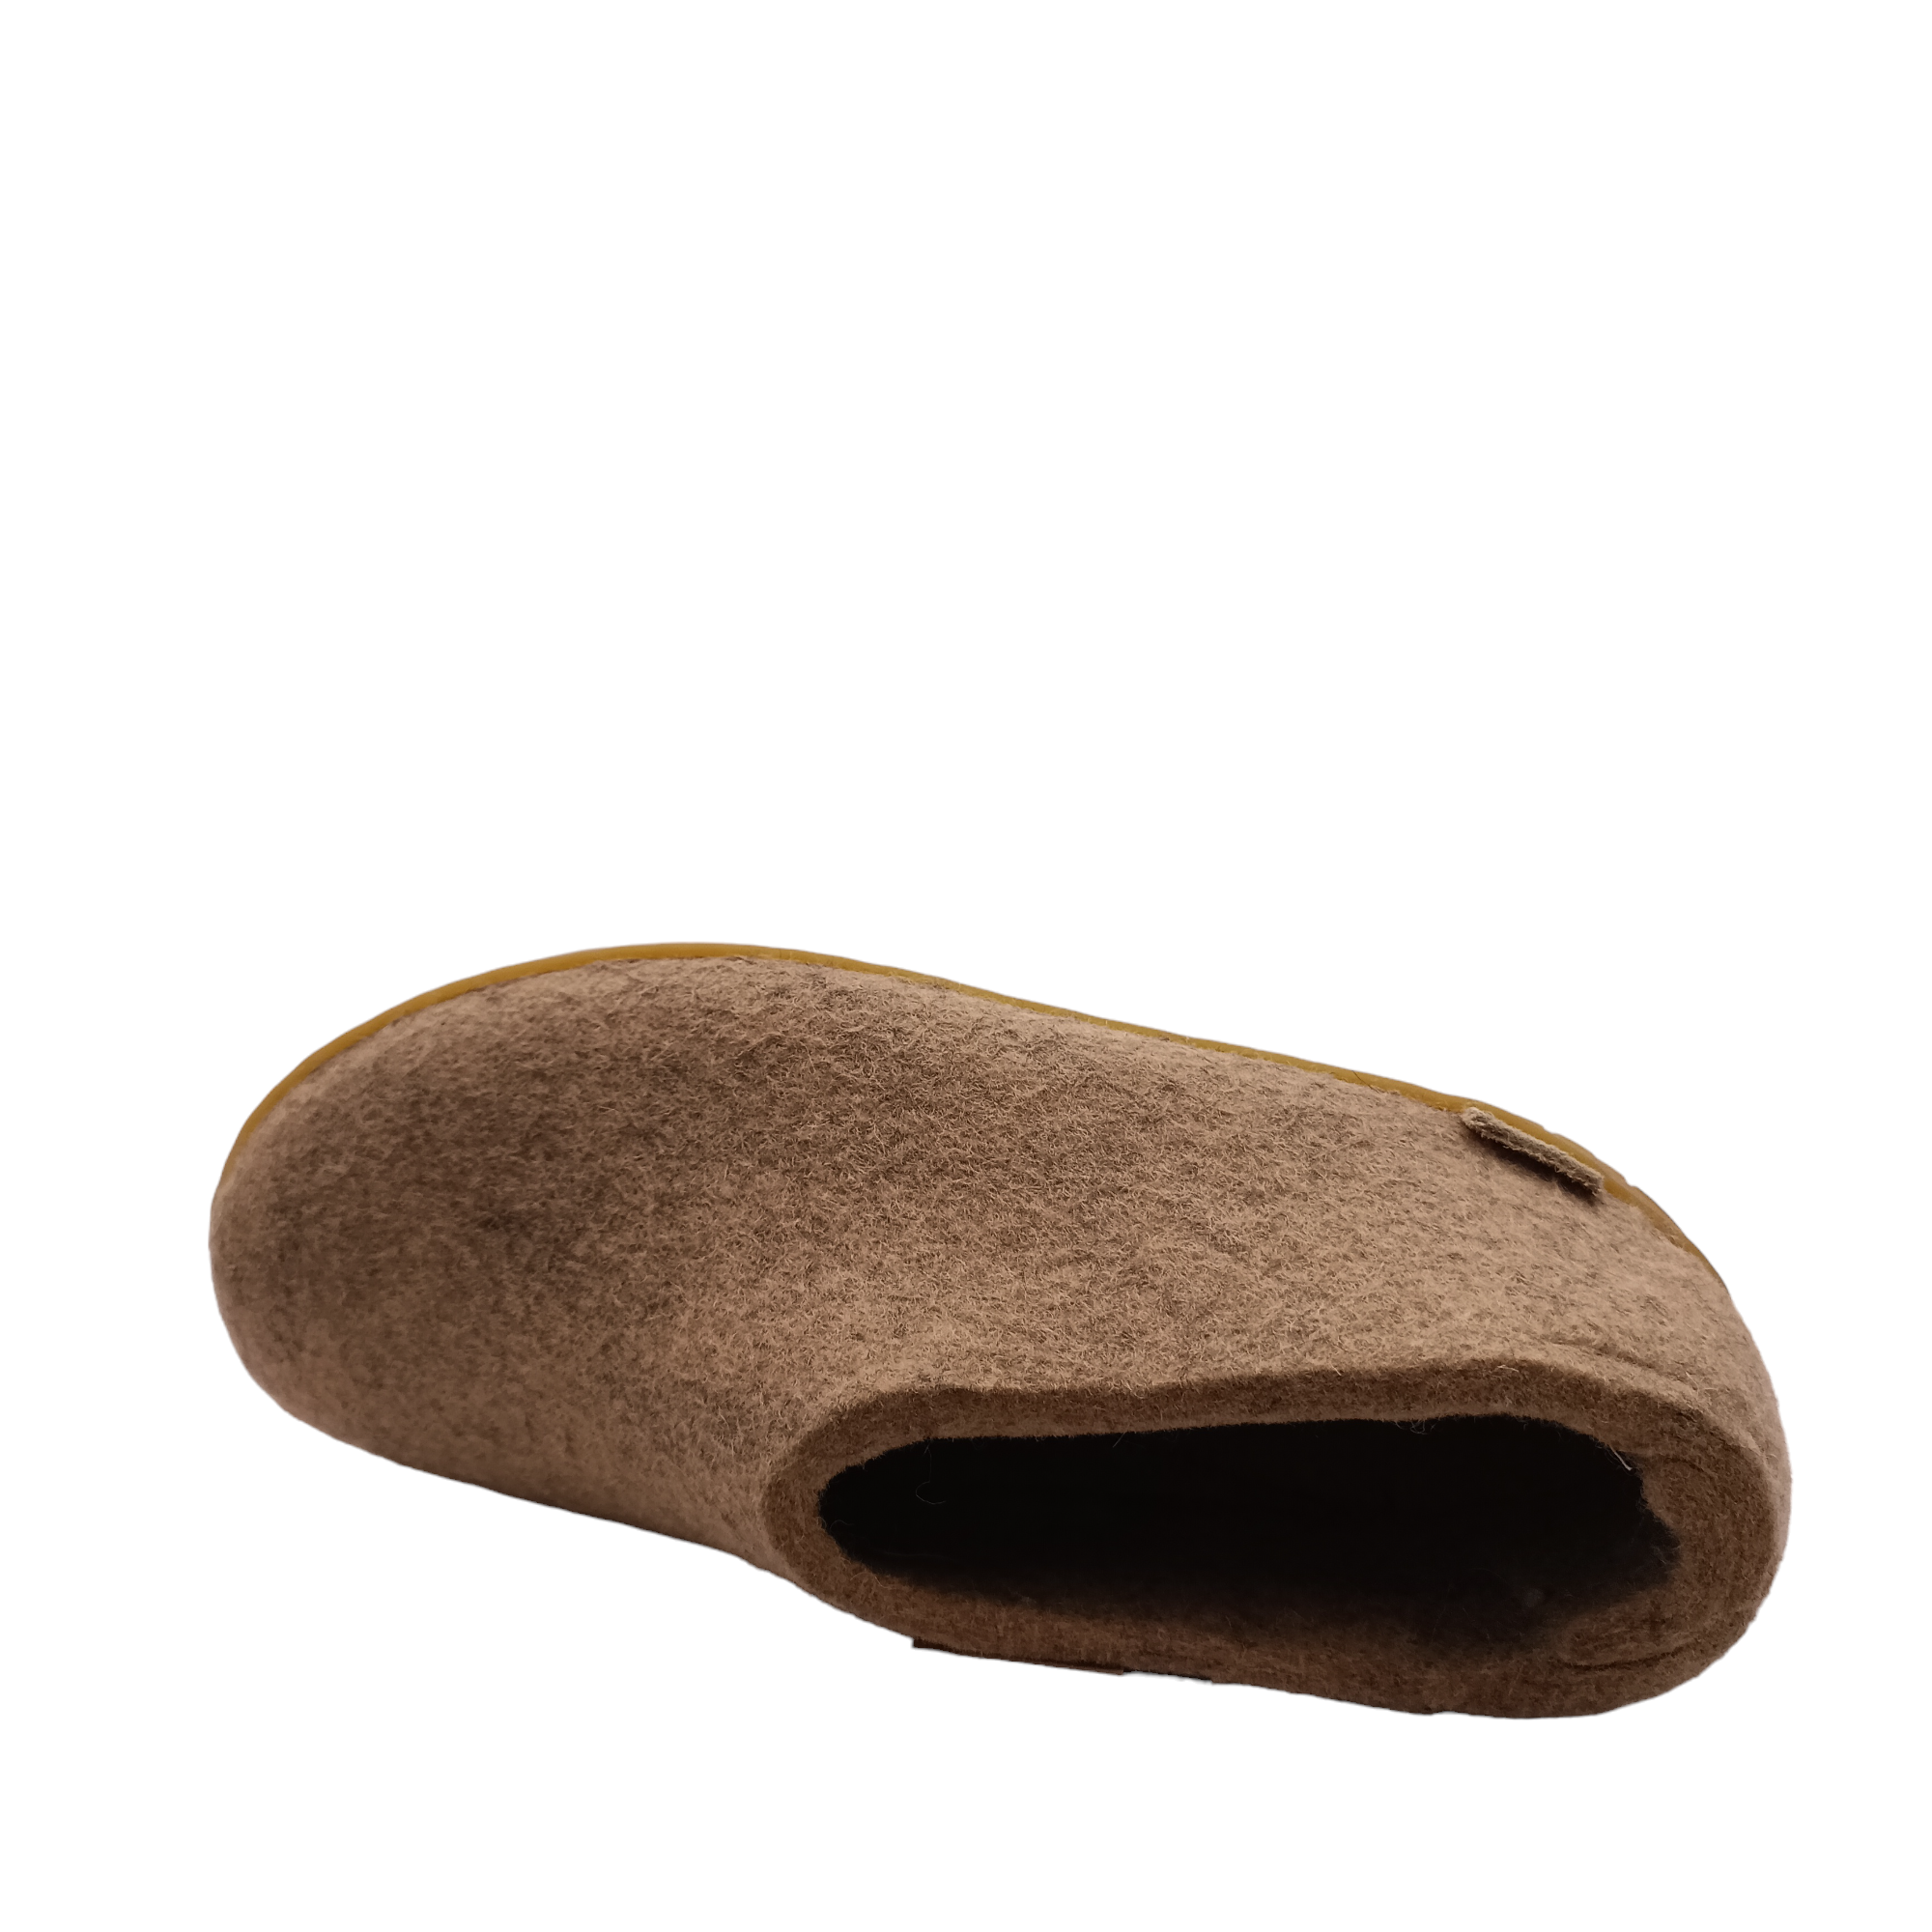 Top view of sand coloured felt wool Glerup shoe or slipper with natural rubber sole. Shop slippers online and instore with shoe&amp;me Mount Maunganui.